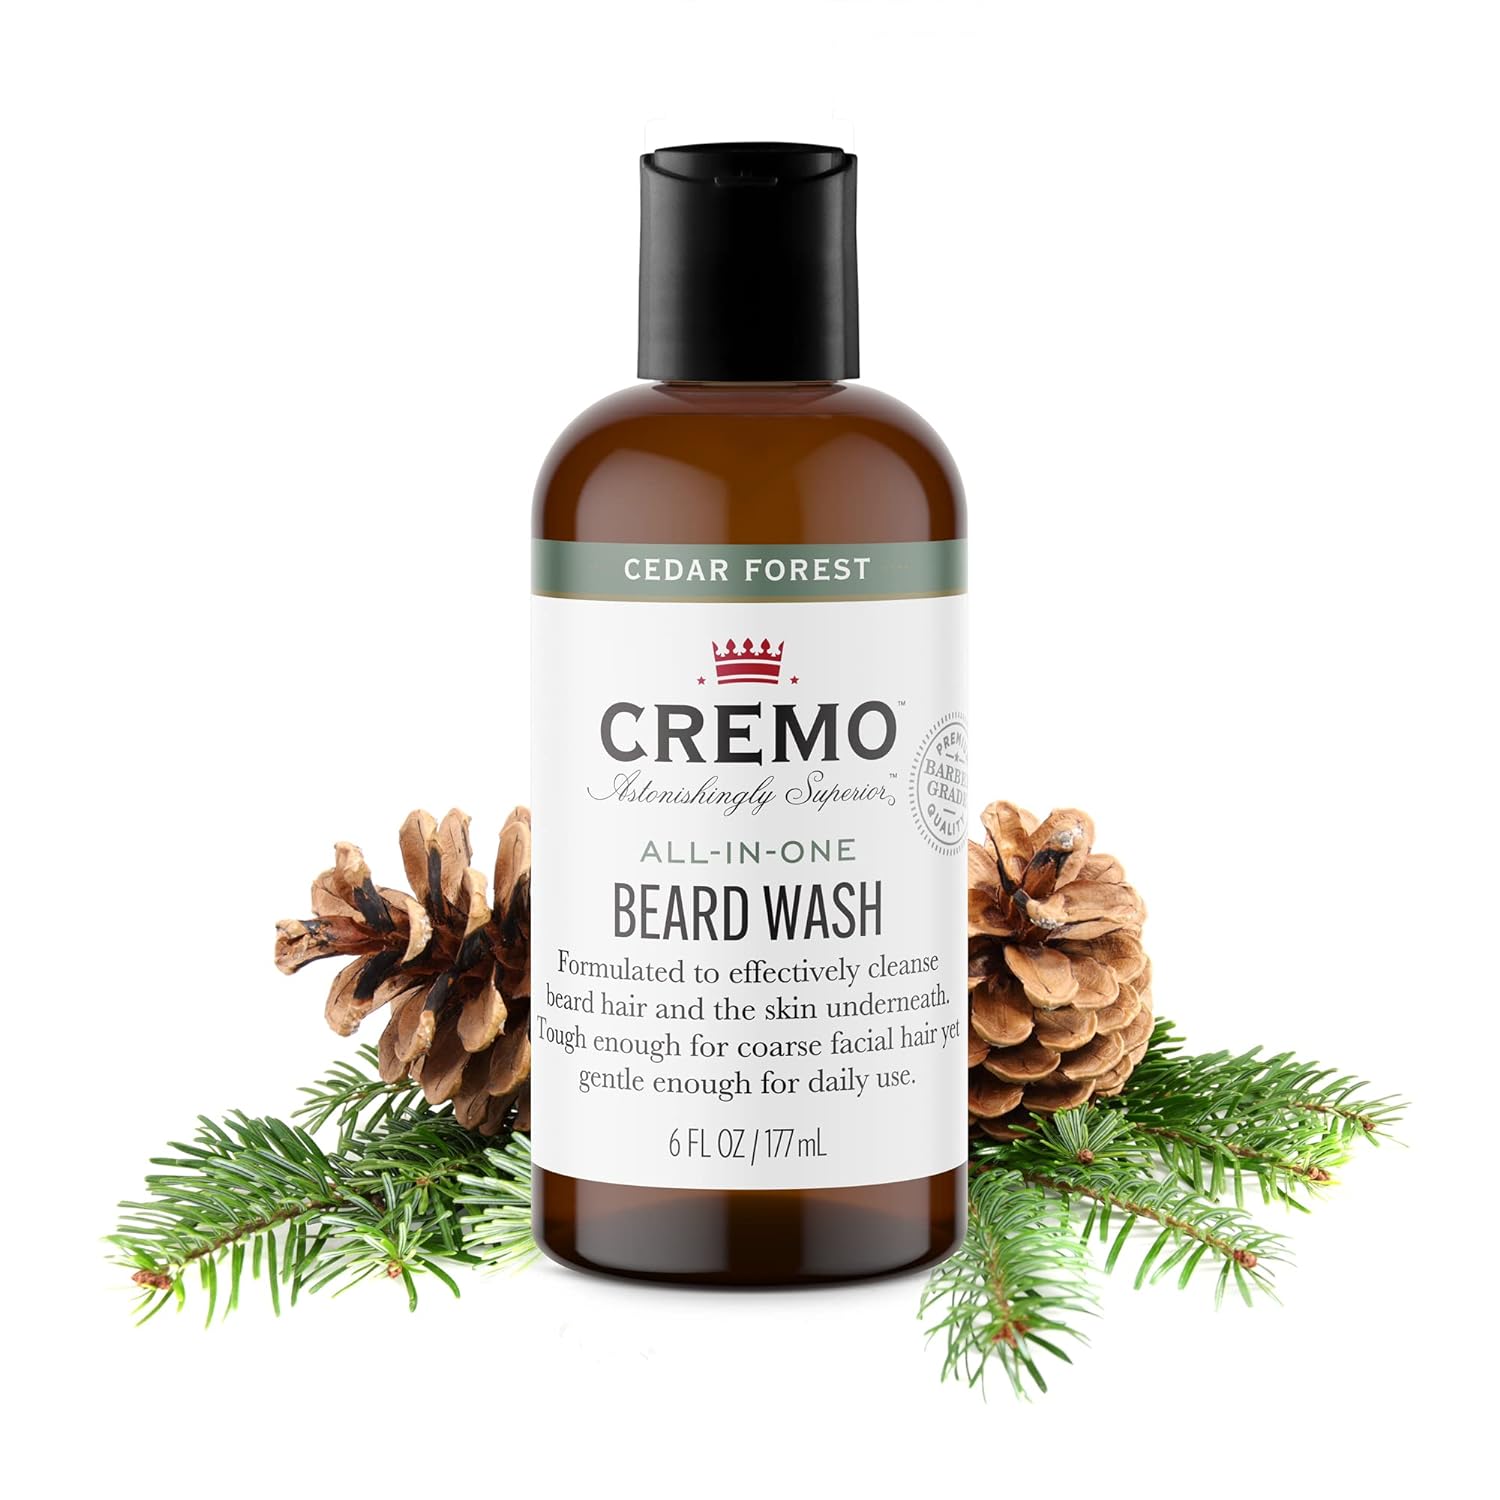 Cremo Cedar Forest All-In-One Beard and Face Wash, Specifically Designed To Clean Coarse Facial Hair, 6 Fluid Oz : Beauty & Personal Care